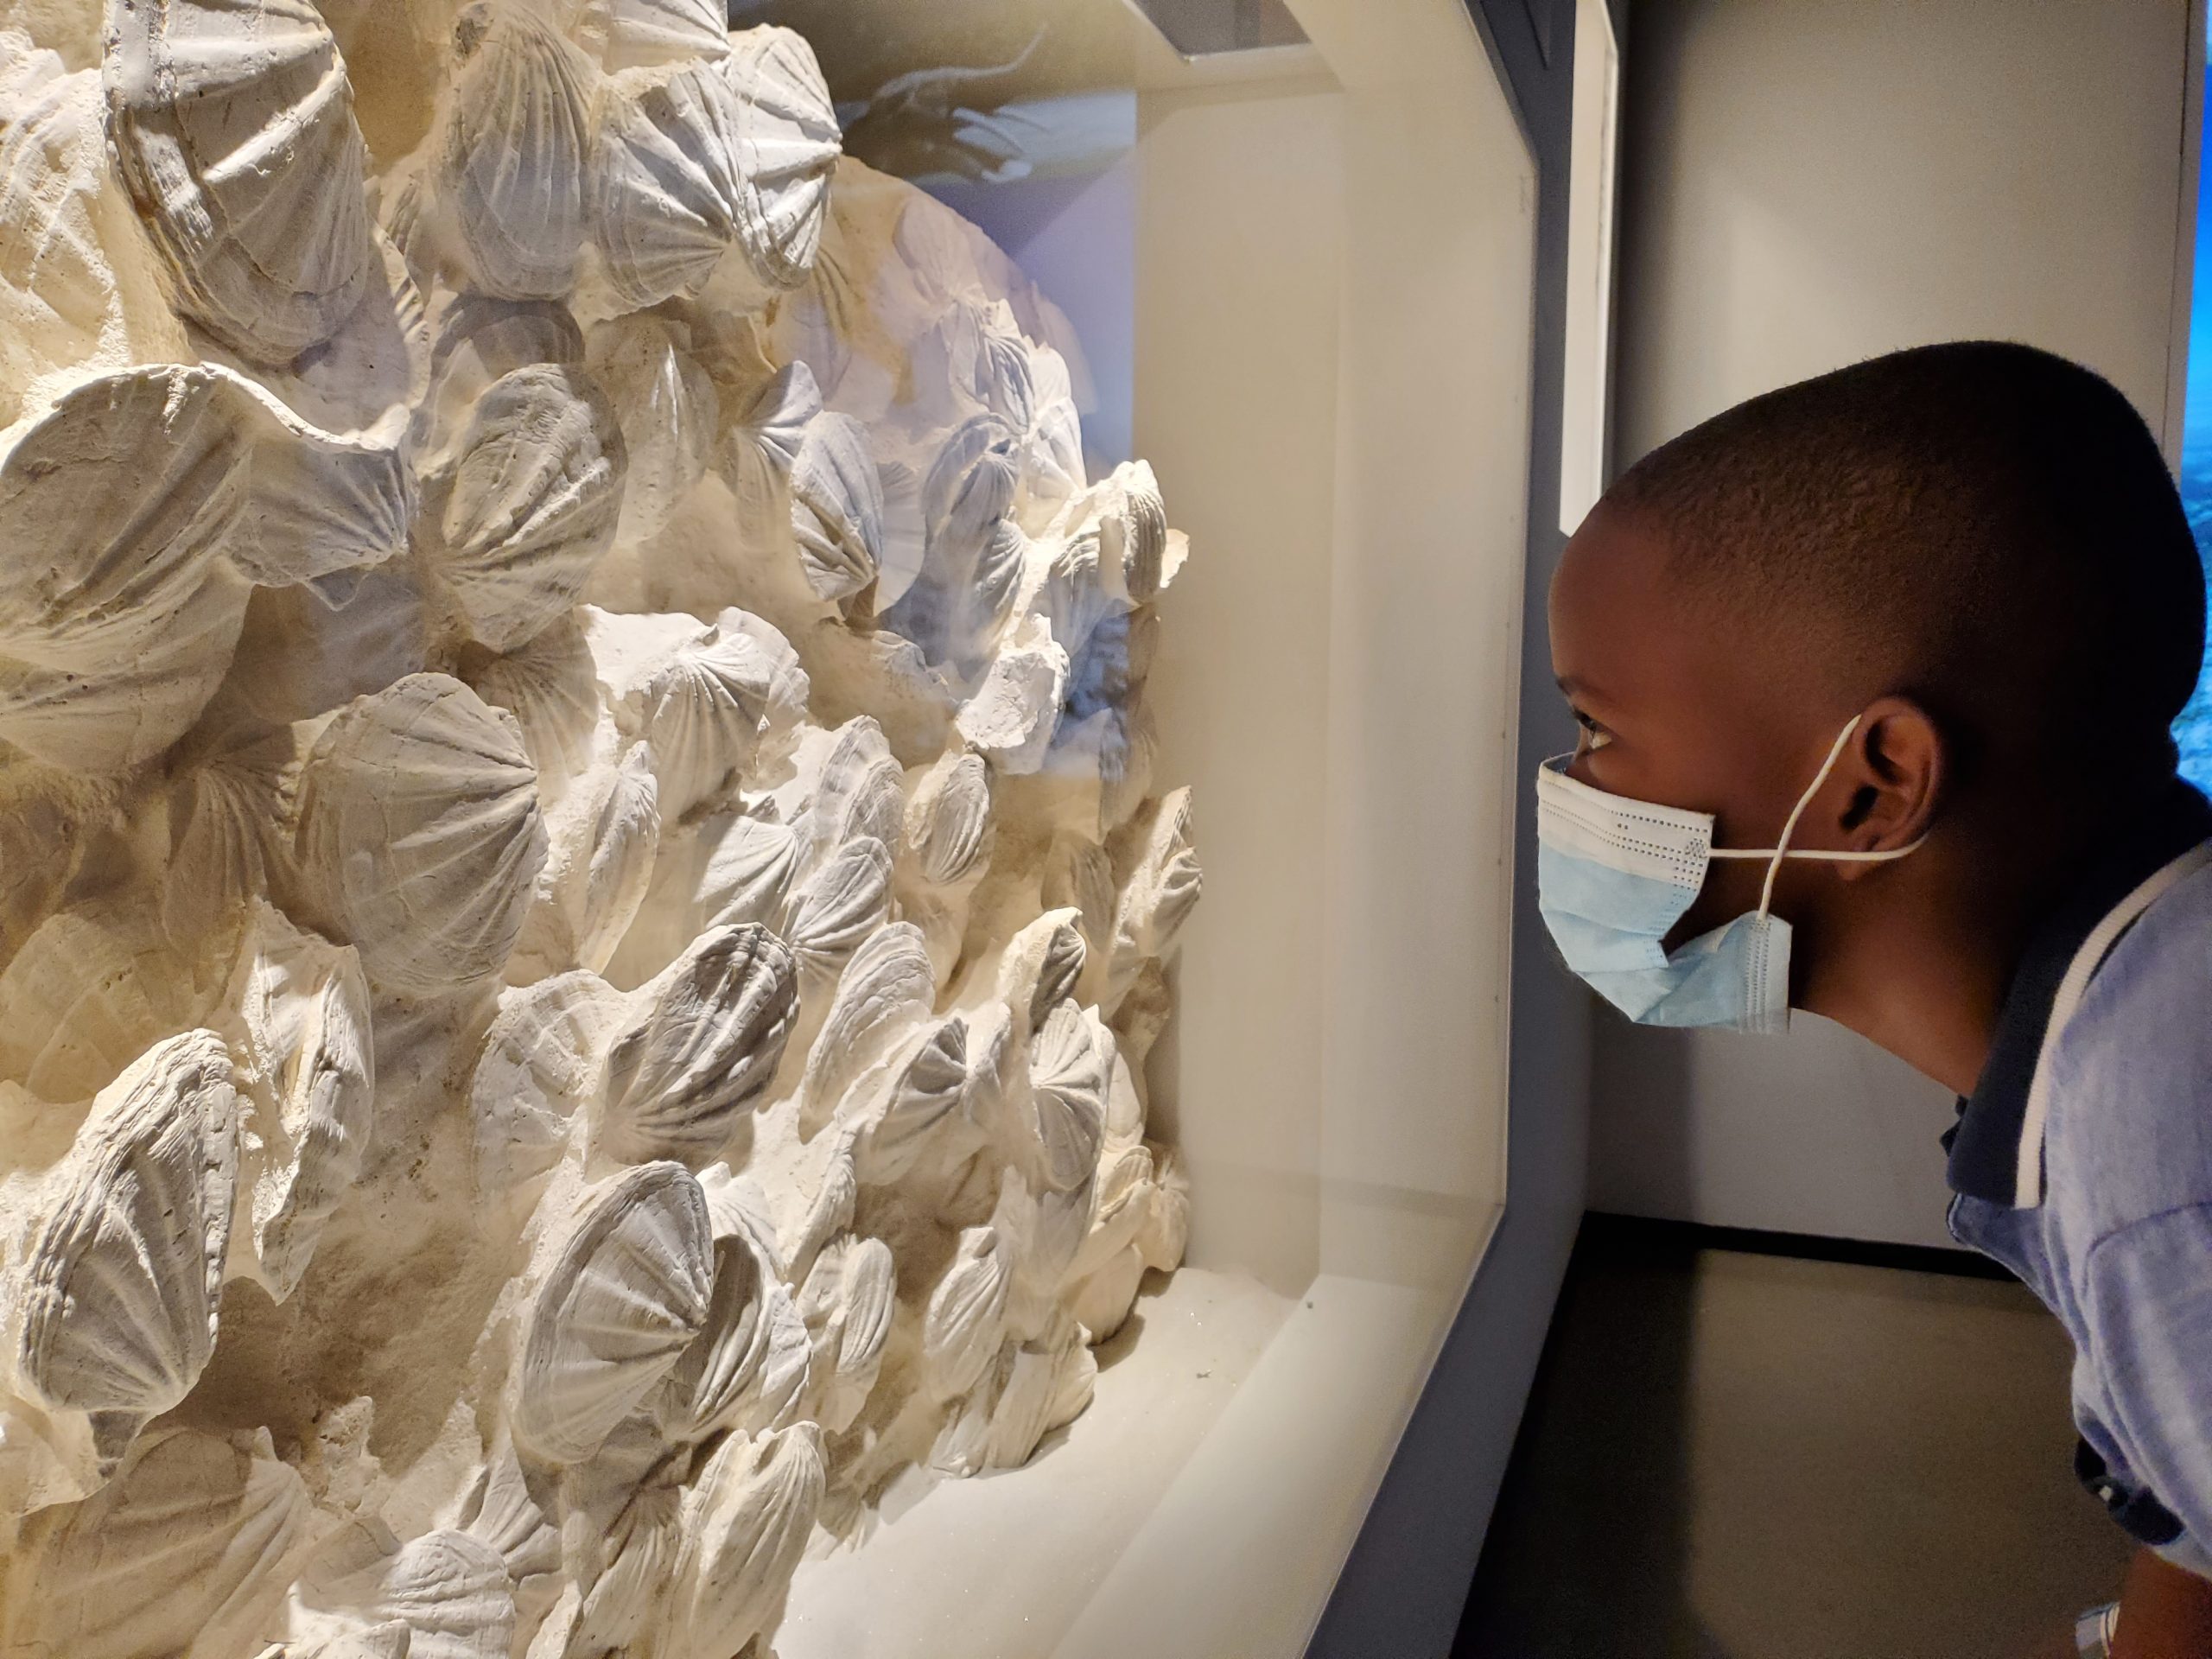 A young Black boy wearing a mask peers into a large wall-mounted display case featuring fossilized seashells.